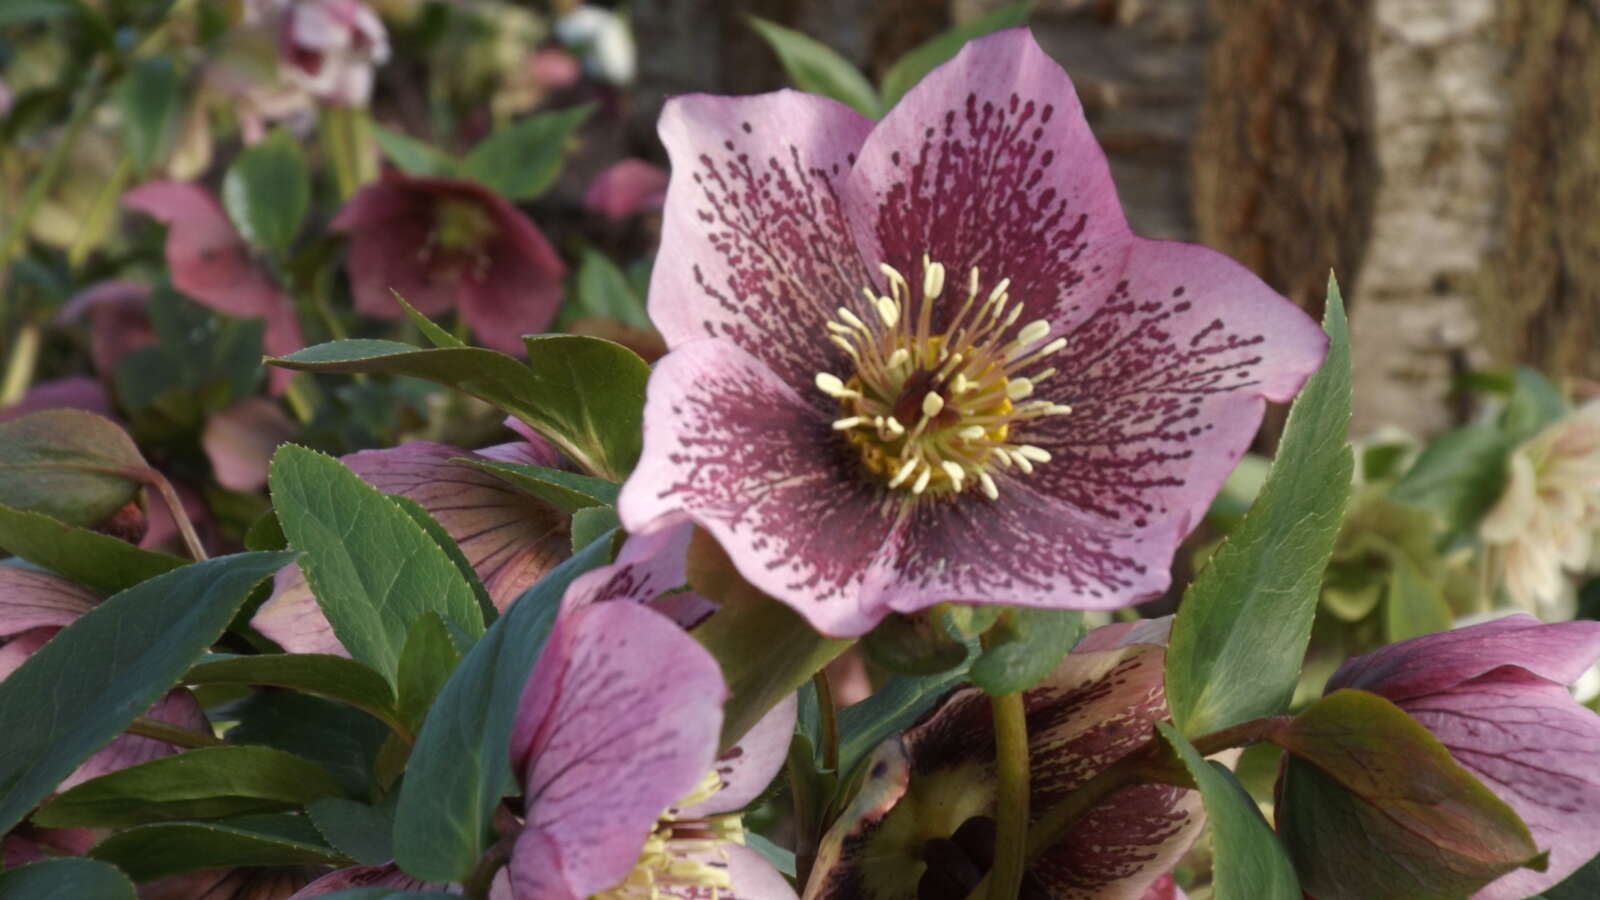 Helebores growing in February